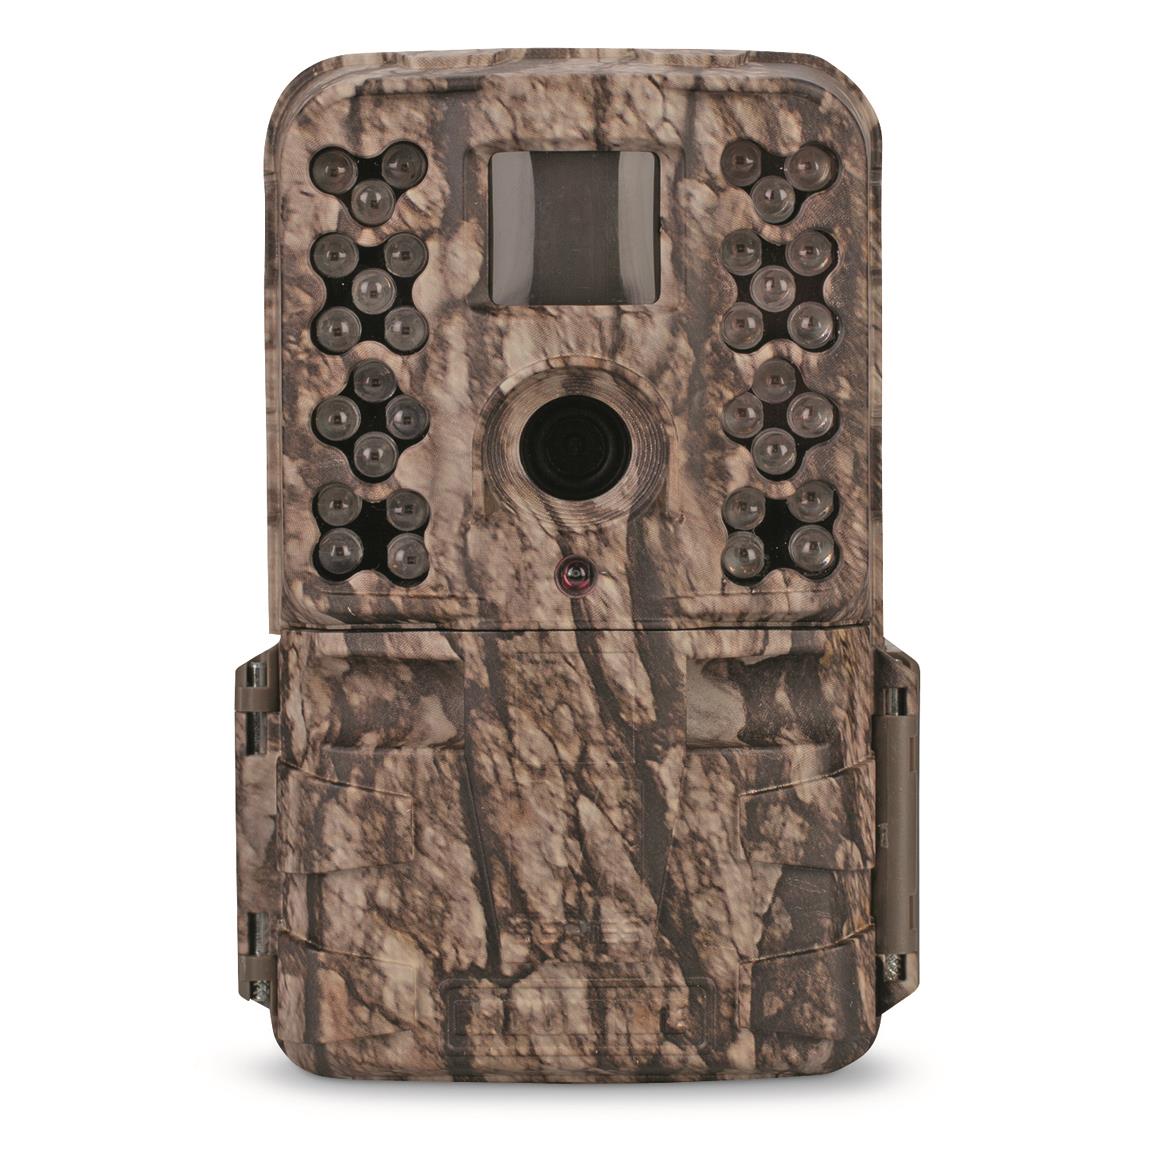 moultrie-m-50-trail-game-camera-706727-game-trail-cameras-at